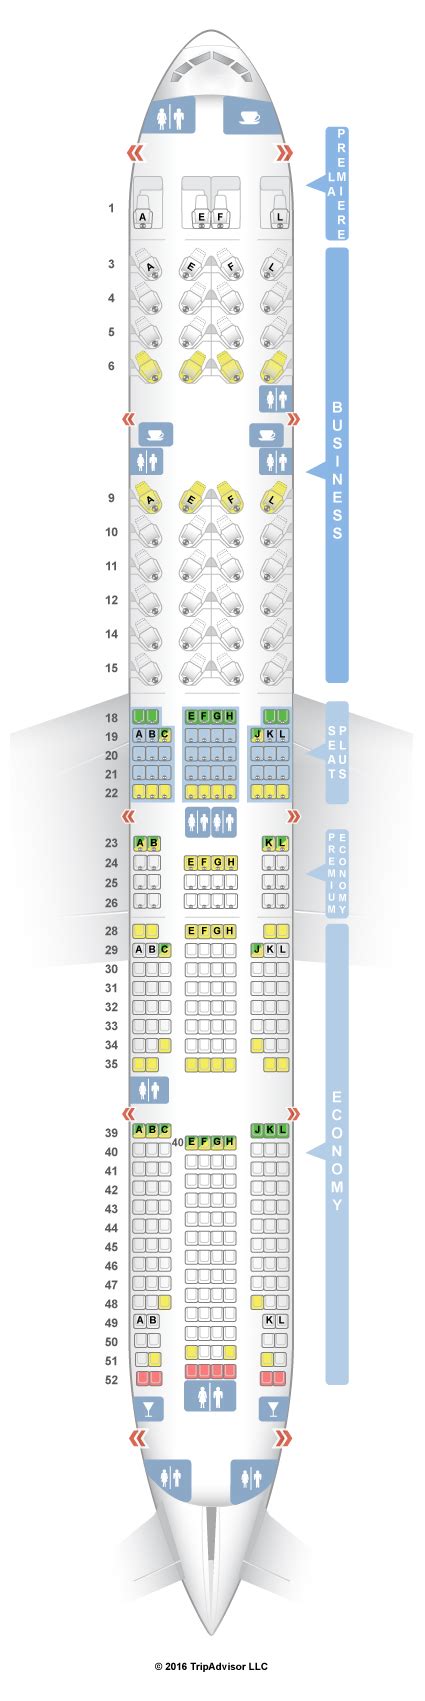 Travelers aboard Air France&39;s Airbus A318-100 V. . Air france seat chart